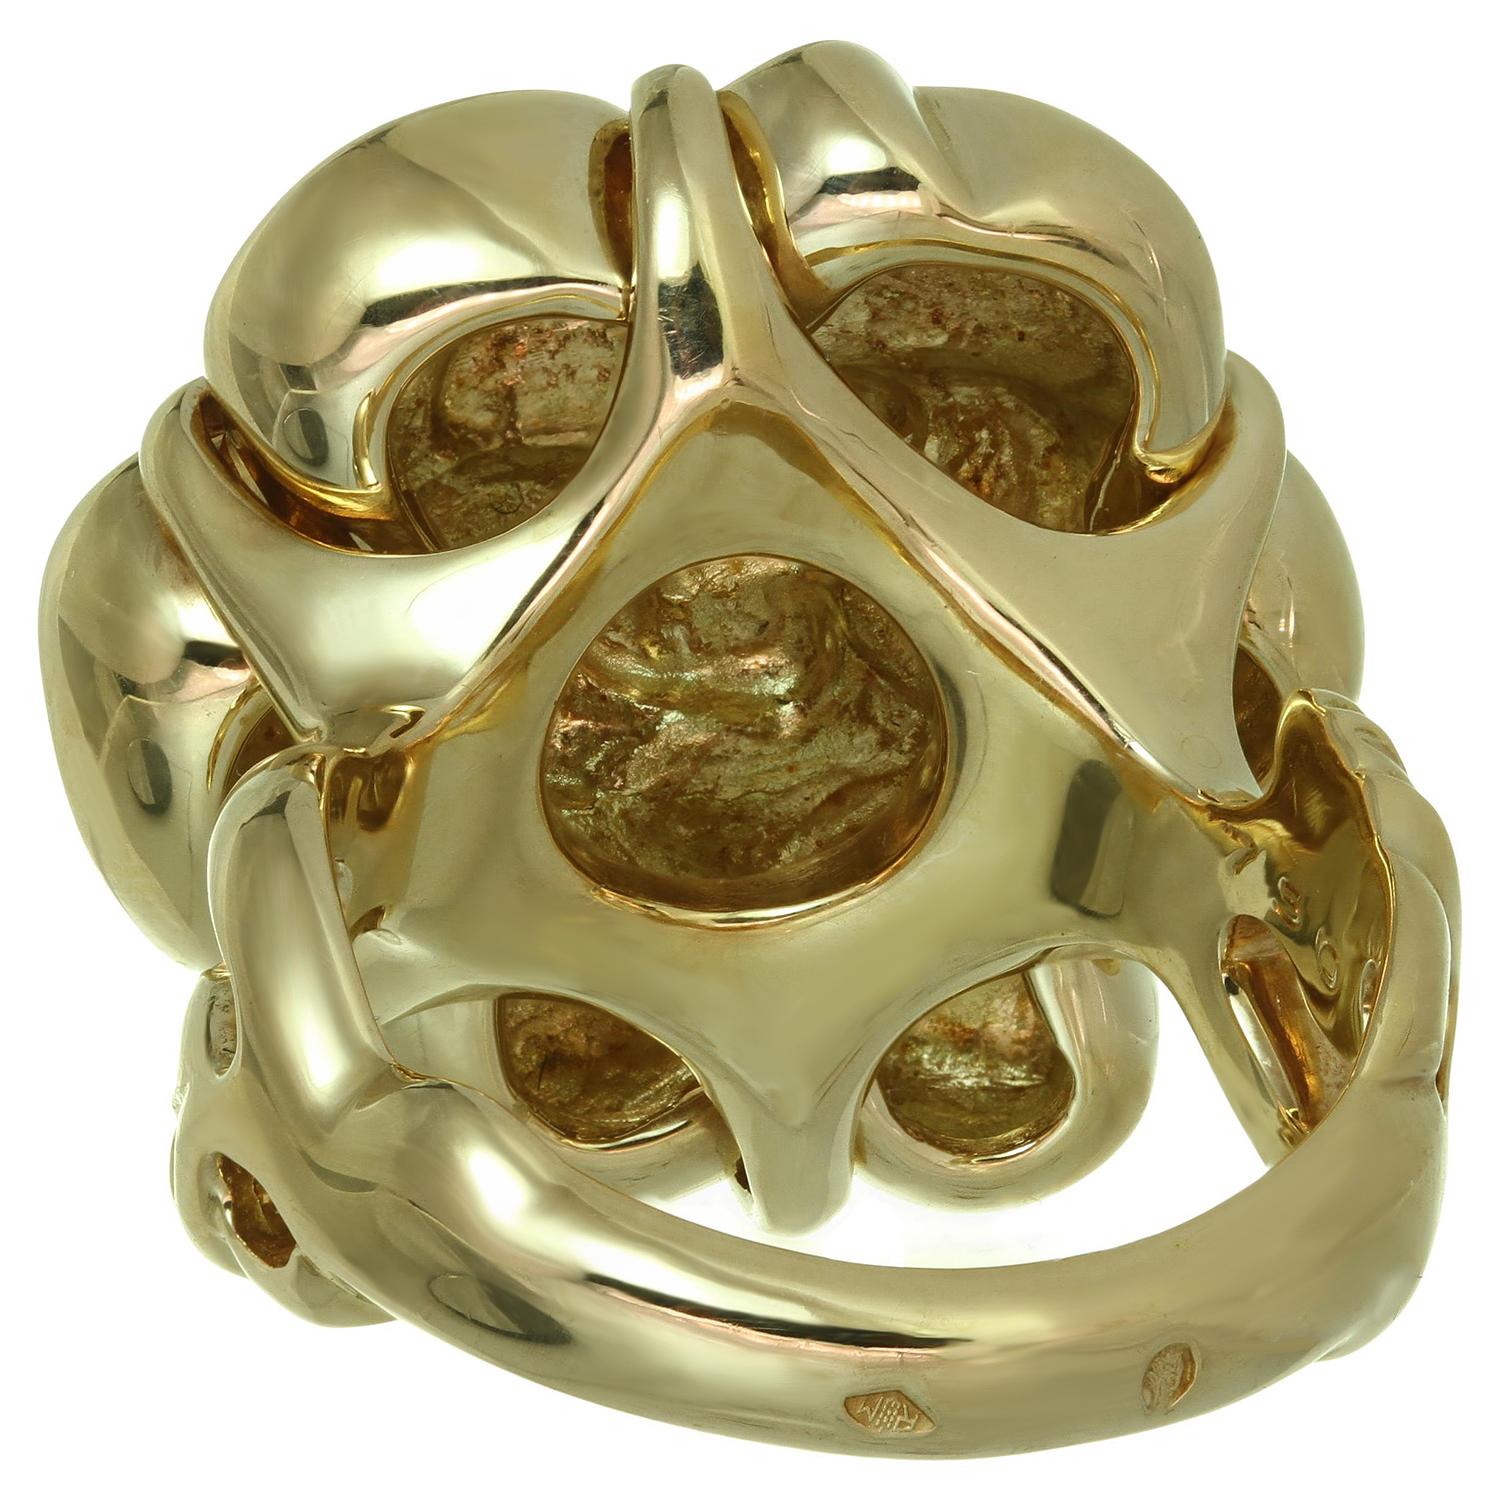 This gorgeous Chanel ring from the elegant Camelia collection features the classic flower design crafted in 18k yellow gold. Made in France circa 2010s. Measurements: 0.90